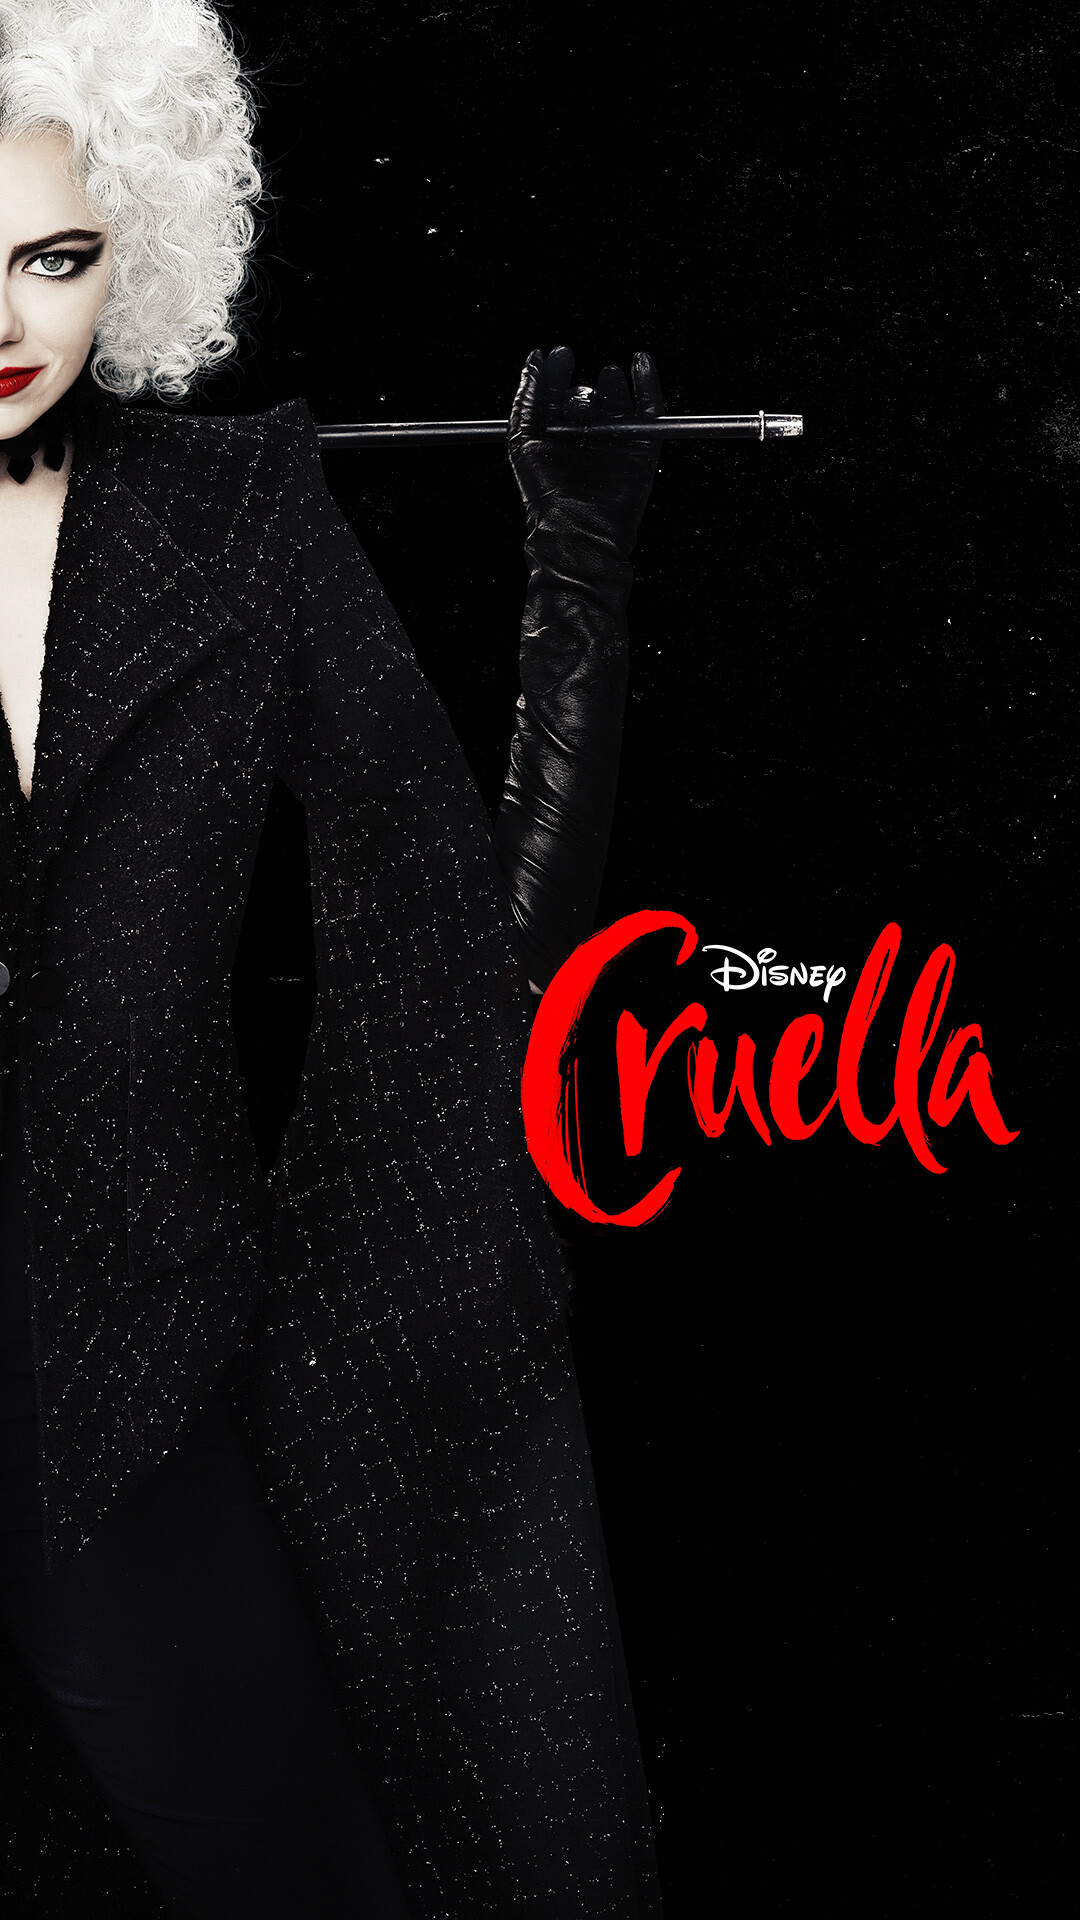 Cruella (2021): A Disney live-action movie inspired by an earlier Disney animated classic — in this case, One Hundred and One Dalmatians. 1080x1920 Full HD Background.